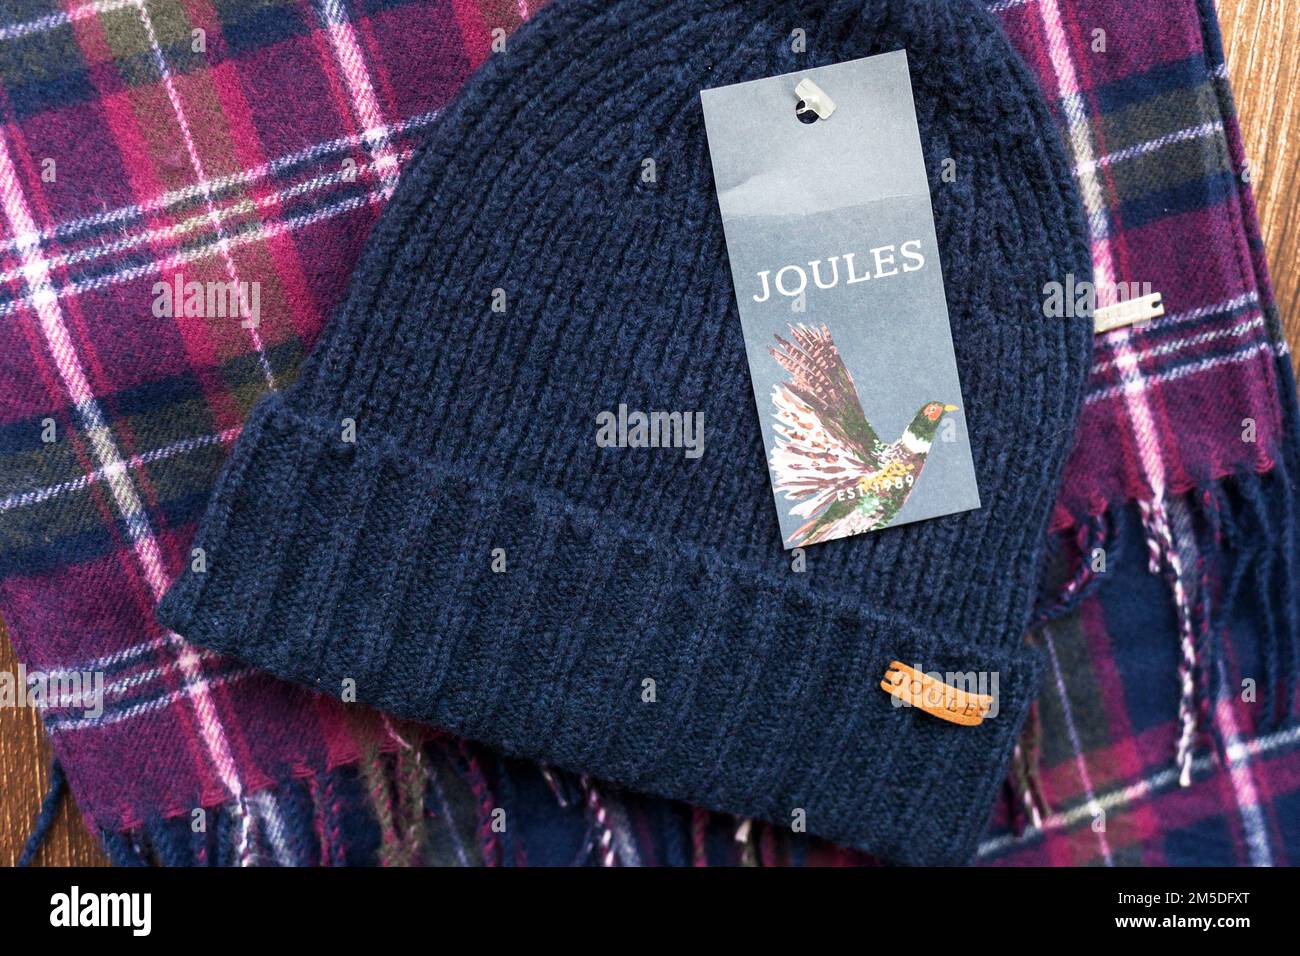 Joules clothing brand Stock Photo